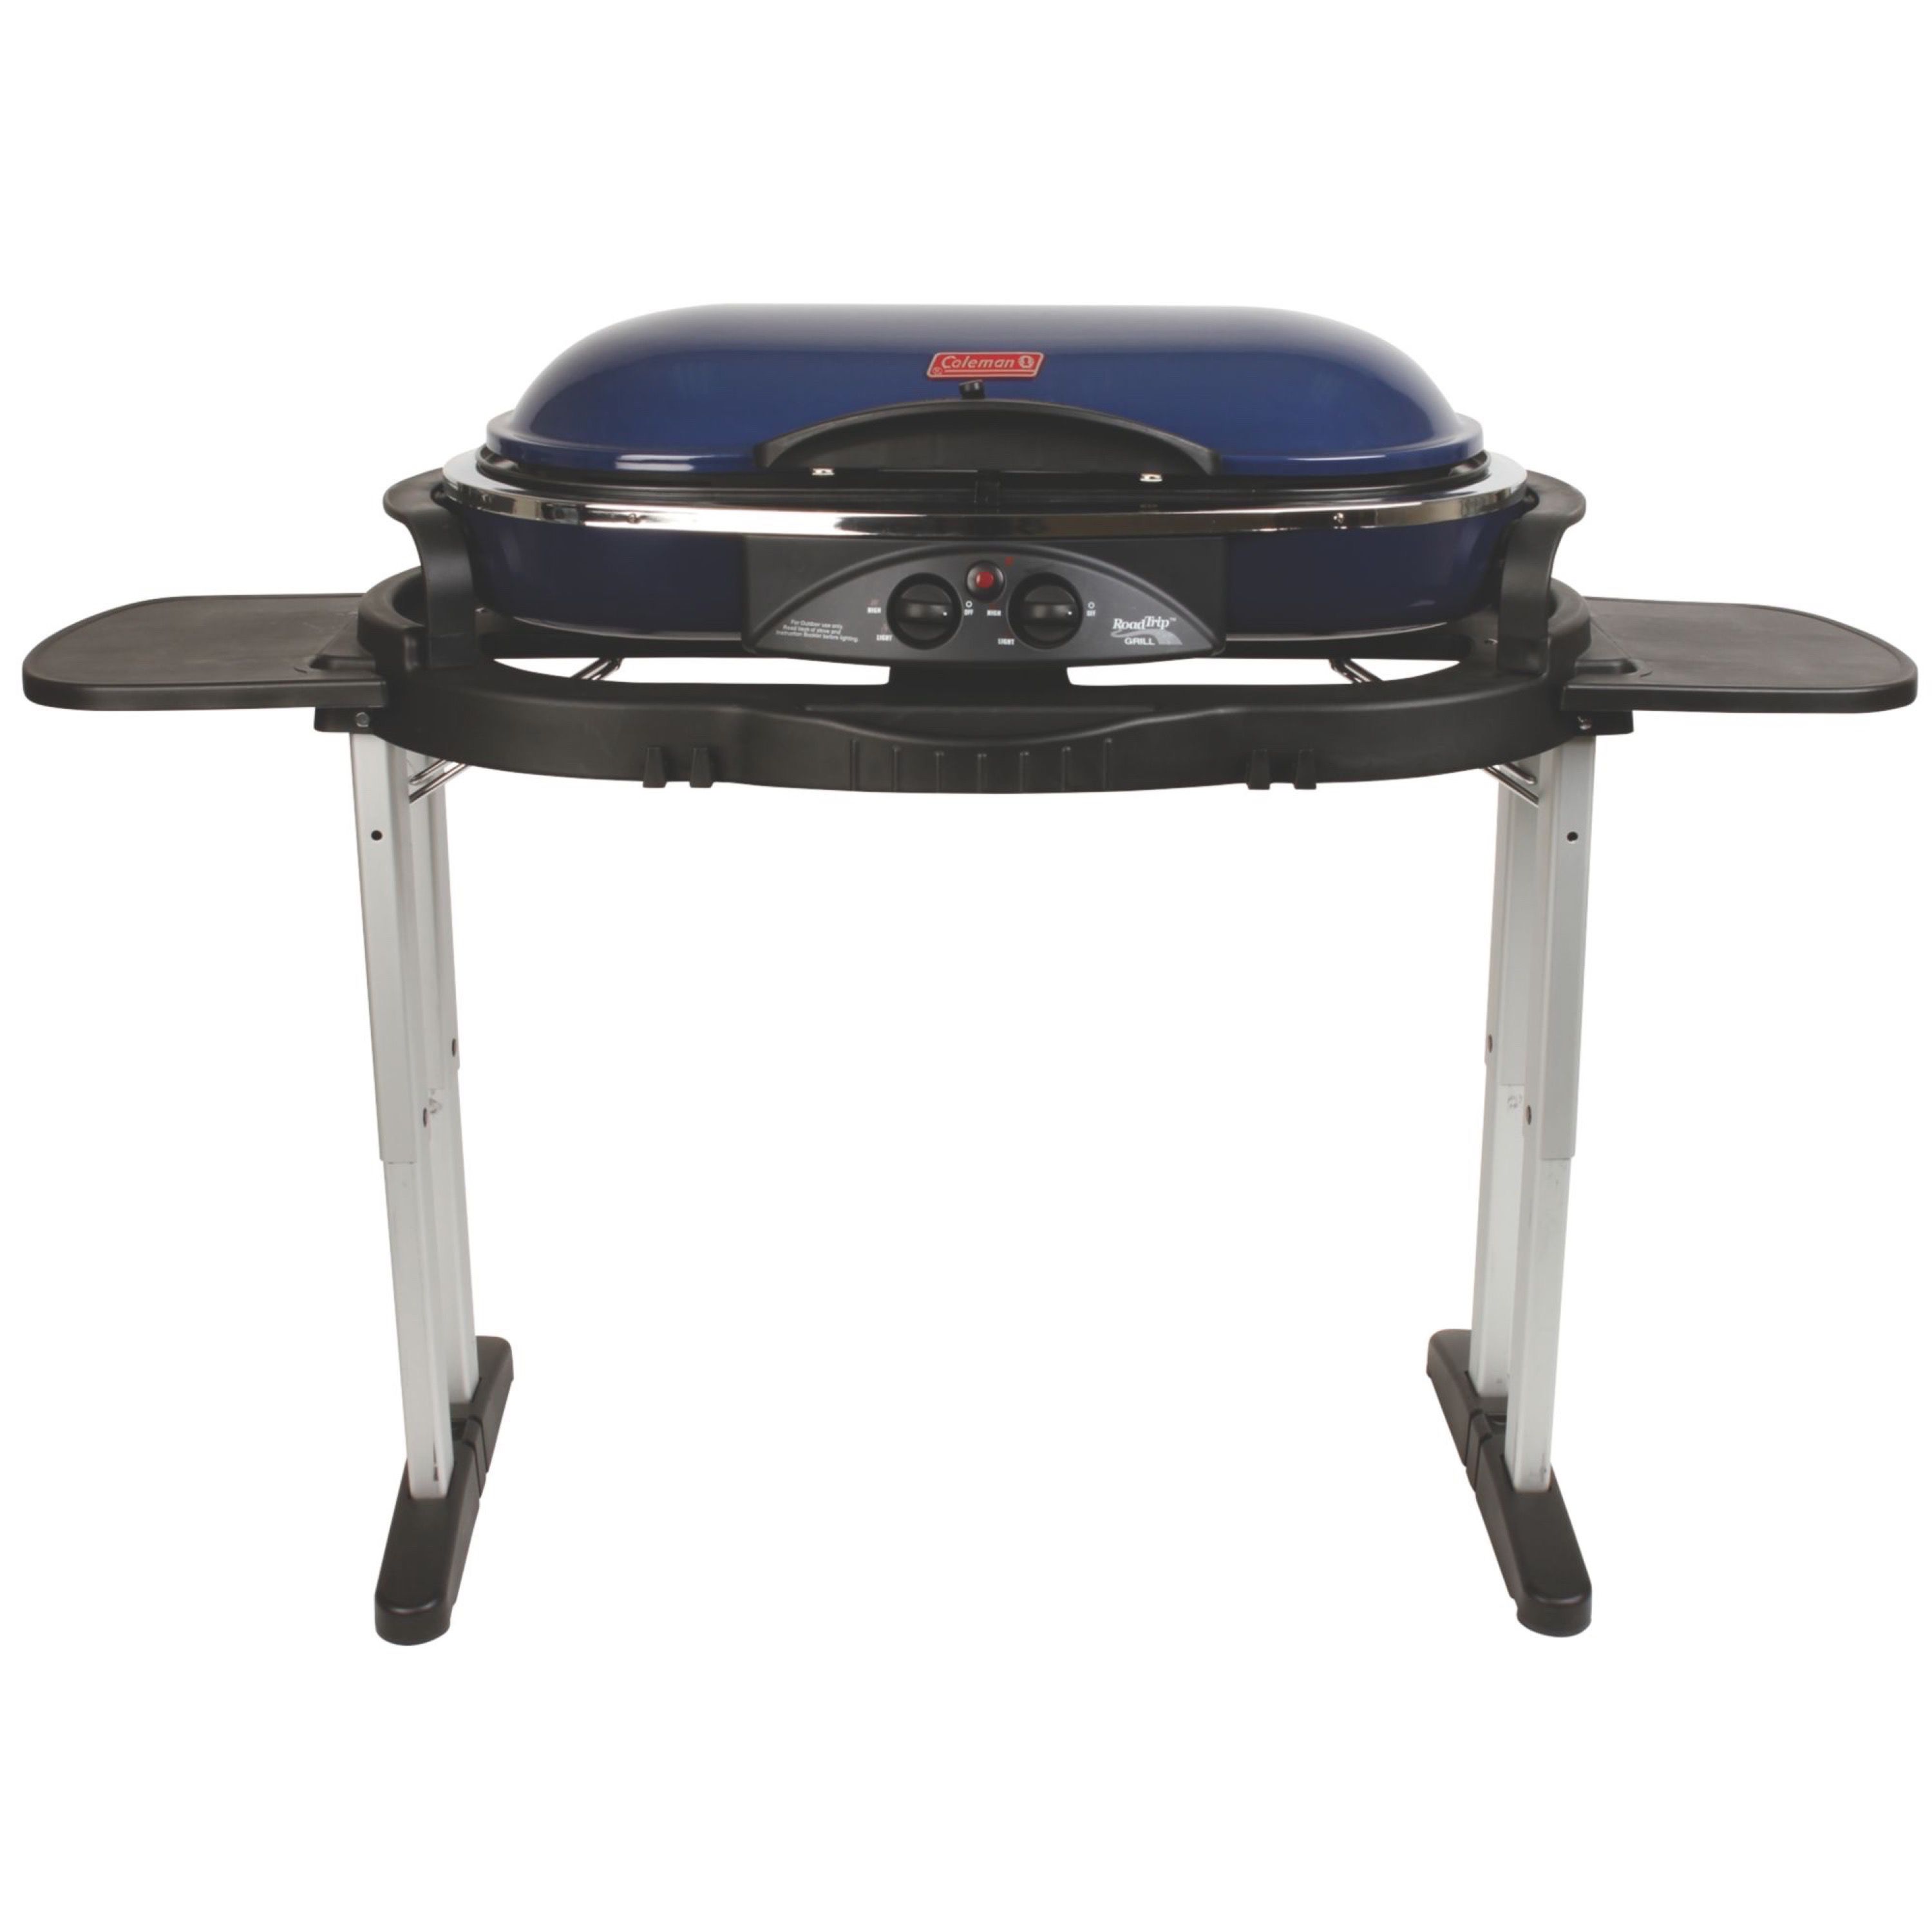 Coleman RoadTrip LX Standup Propane Gas Grill - image 1 of 14